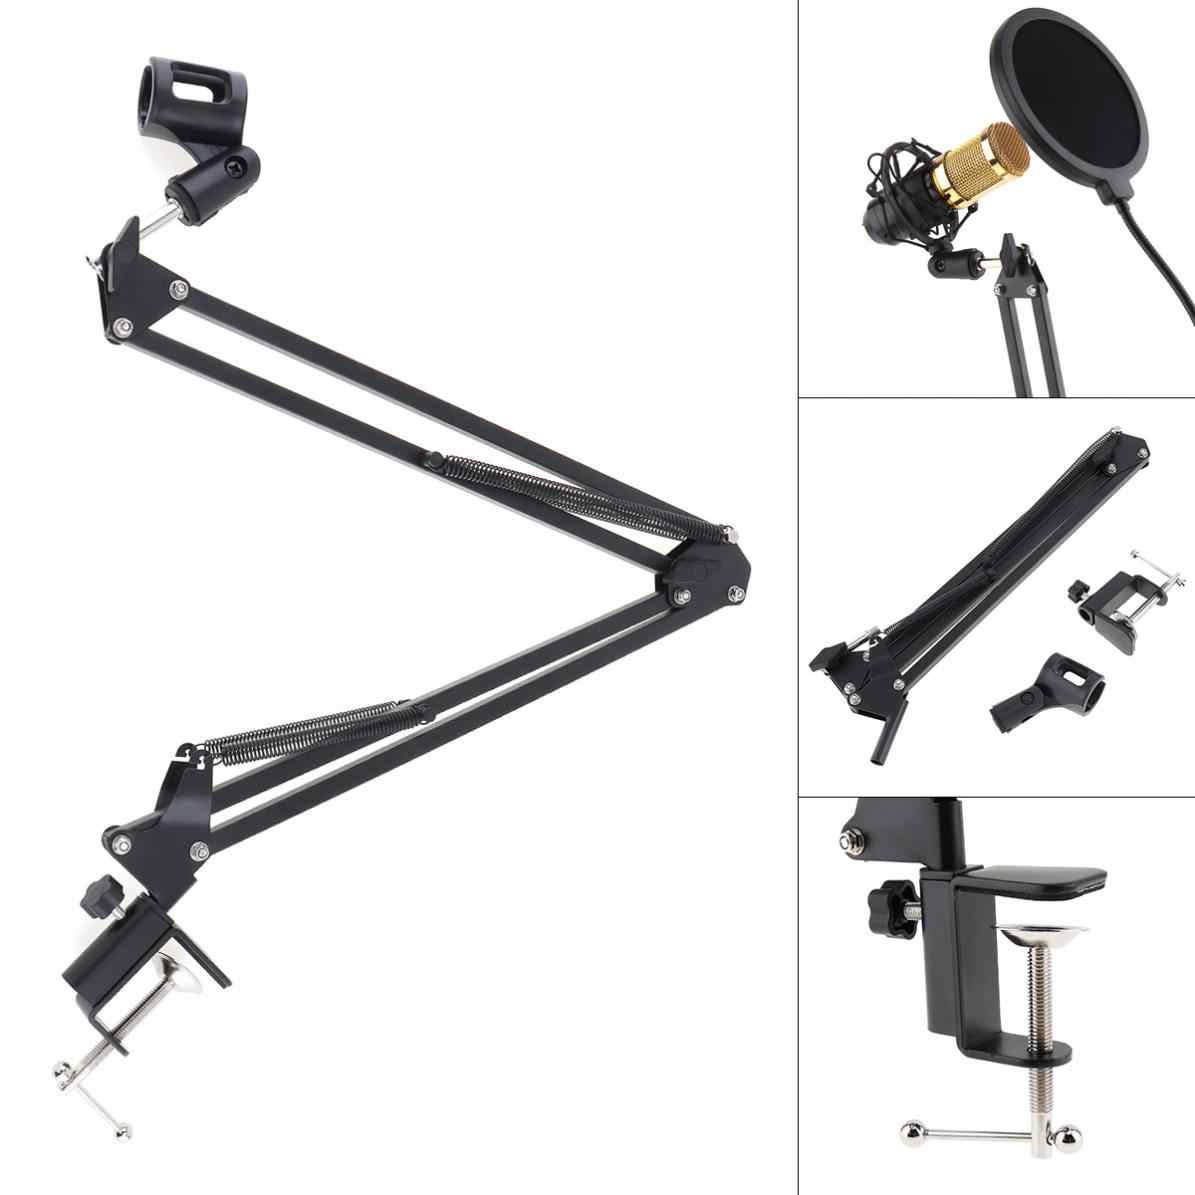 RM NB-35 Microphone Suspension Boom Scissor Arm Desktop Stand + Double Layer Pop Filter Wind Screen - Reco Music Malaysia